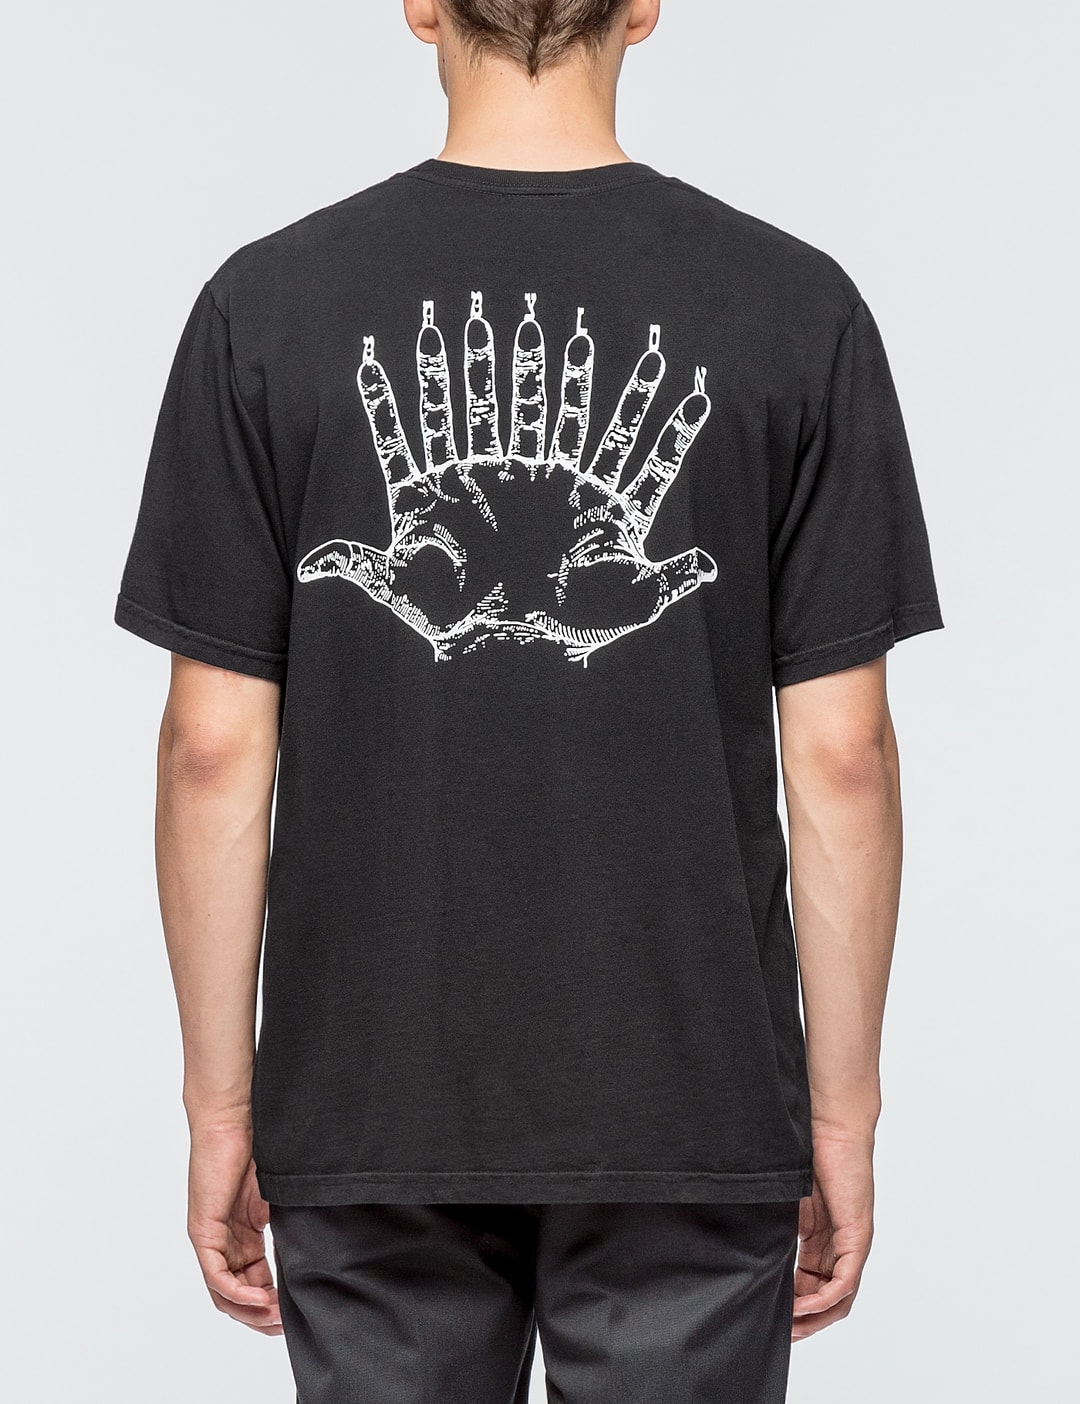 Babylon - Hand T-Shirt | HBX - Globally Curated Fashion and Lifestyle ...